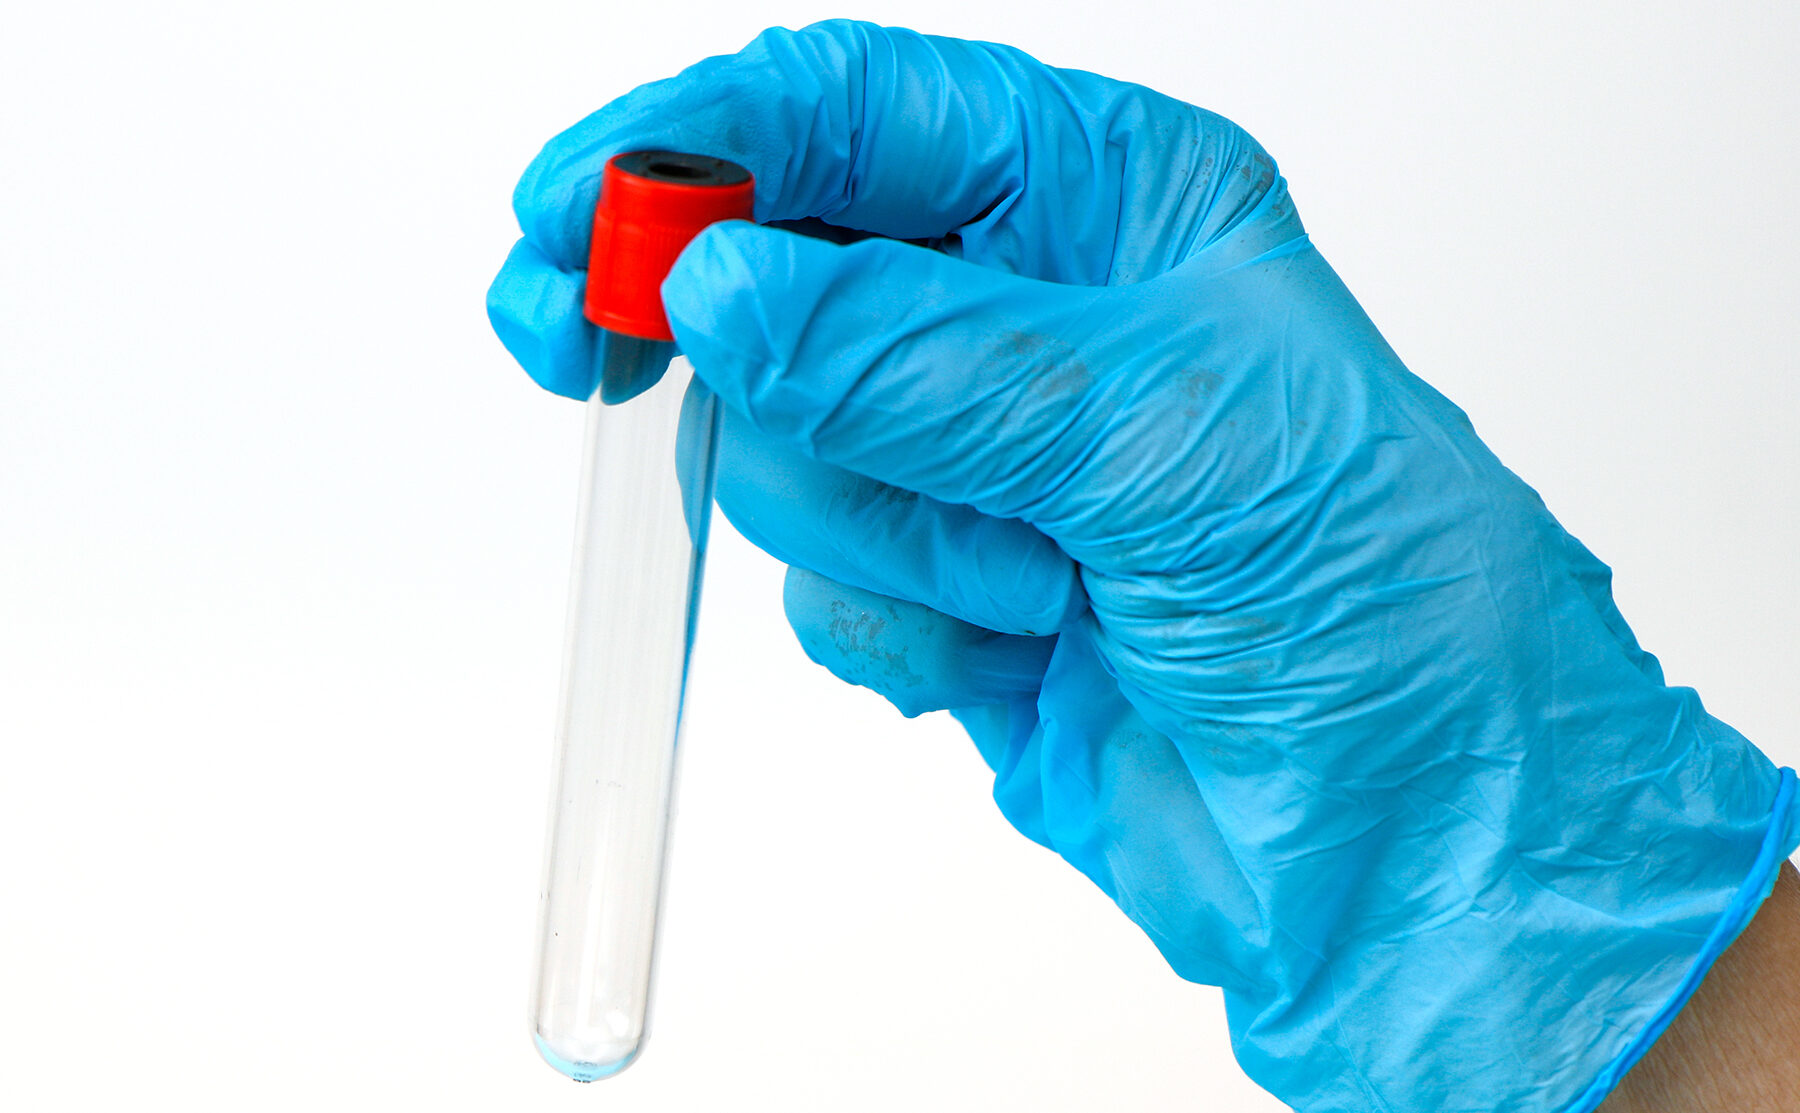 a hand in a medical glove holds an empty test tube on a light background with copy space.